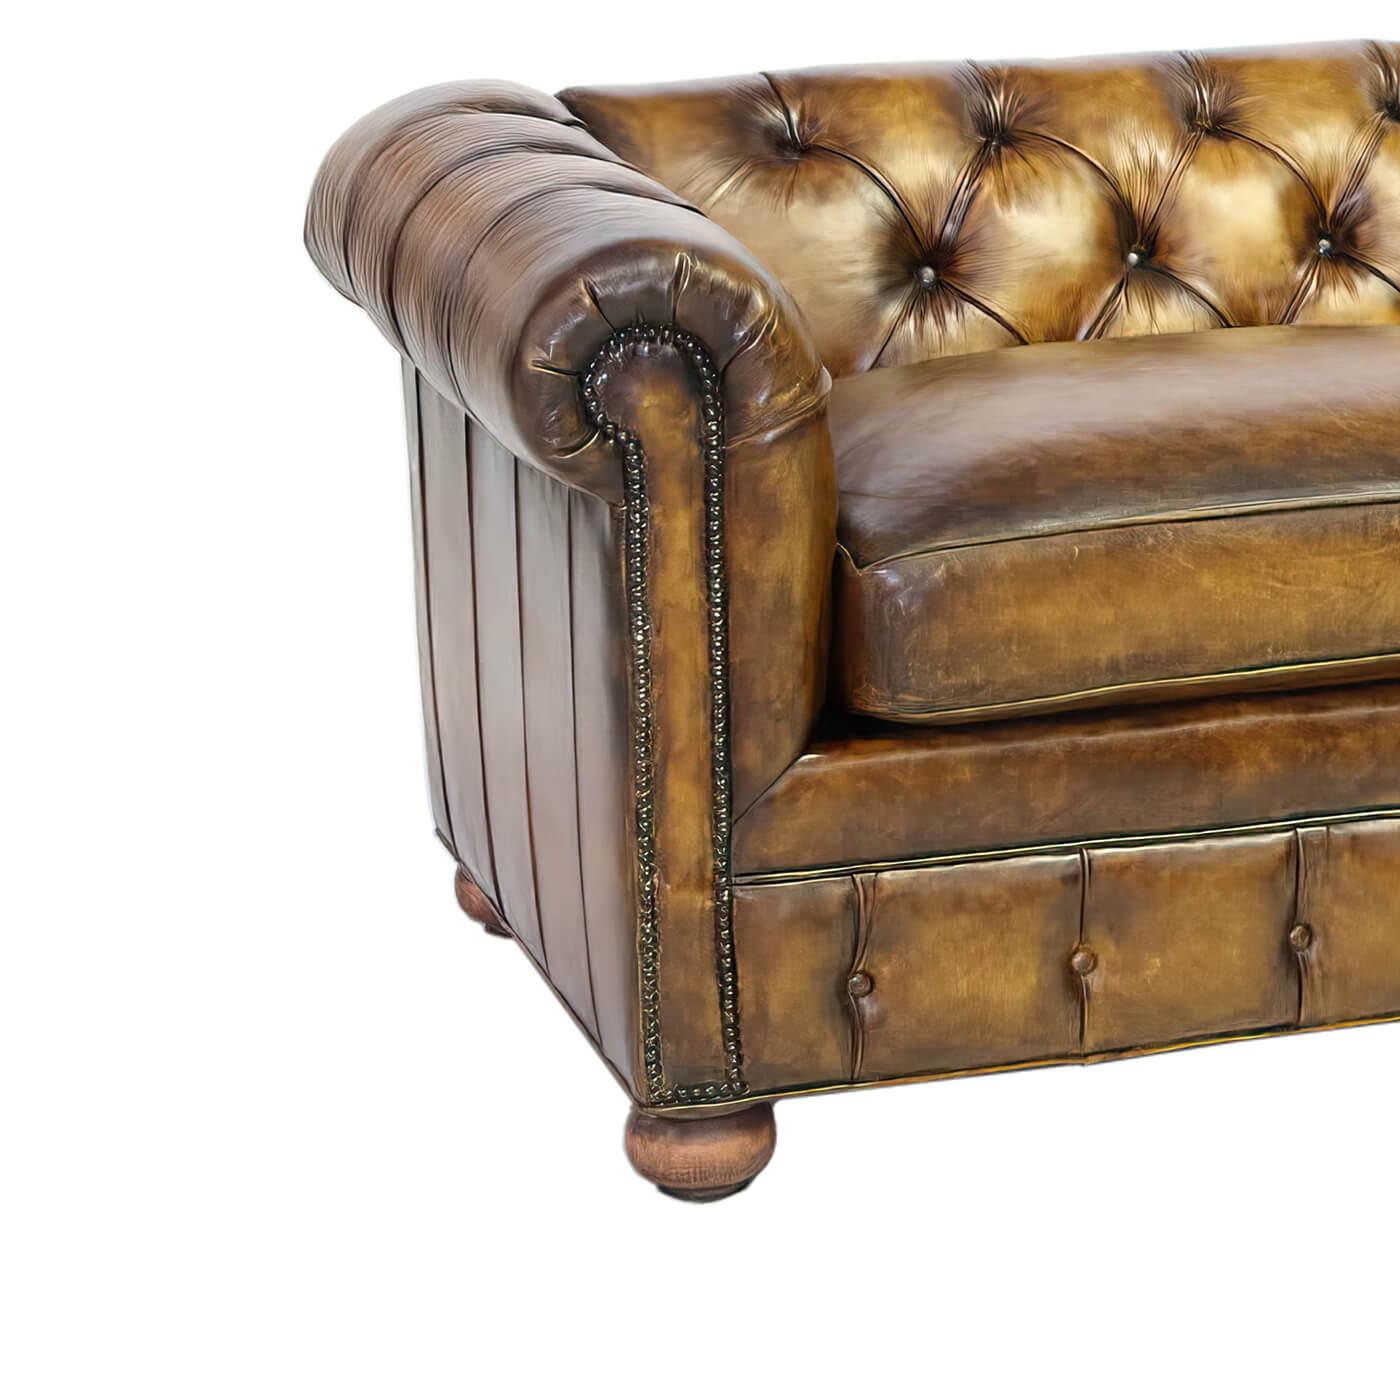 From our US Based custom upholstery and tannery workshop, this Chesterfield sofa is customizable and made with one of our many available types of leather. Available with a weathered and antique finish, to offer patina and look of age, these